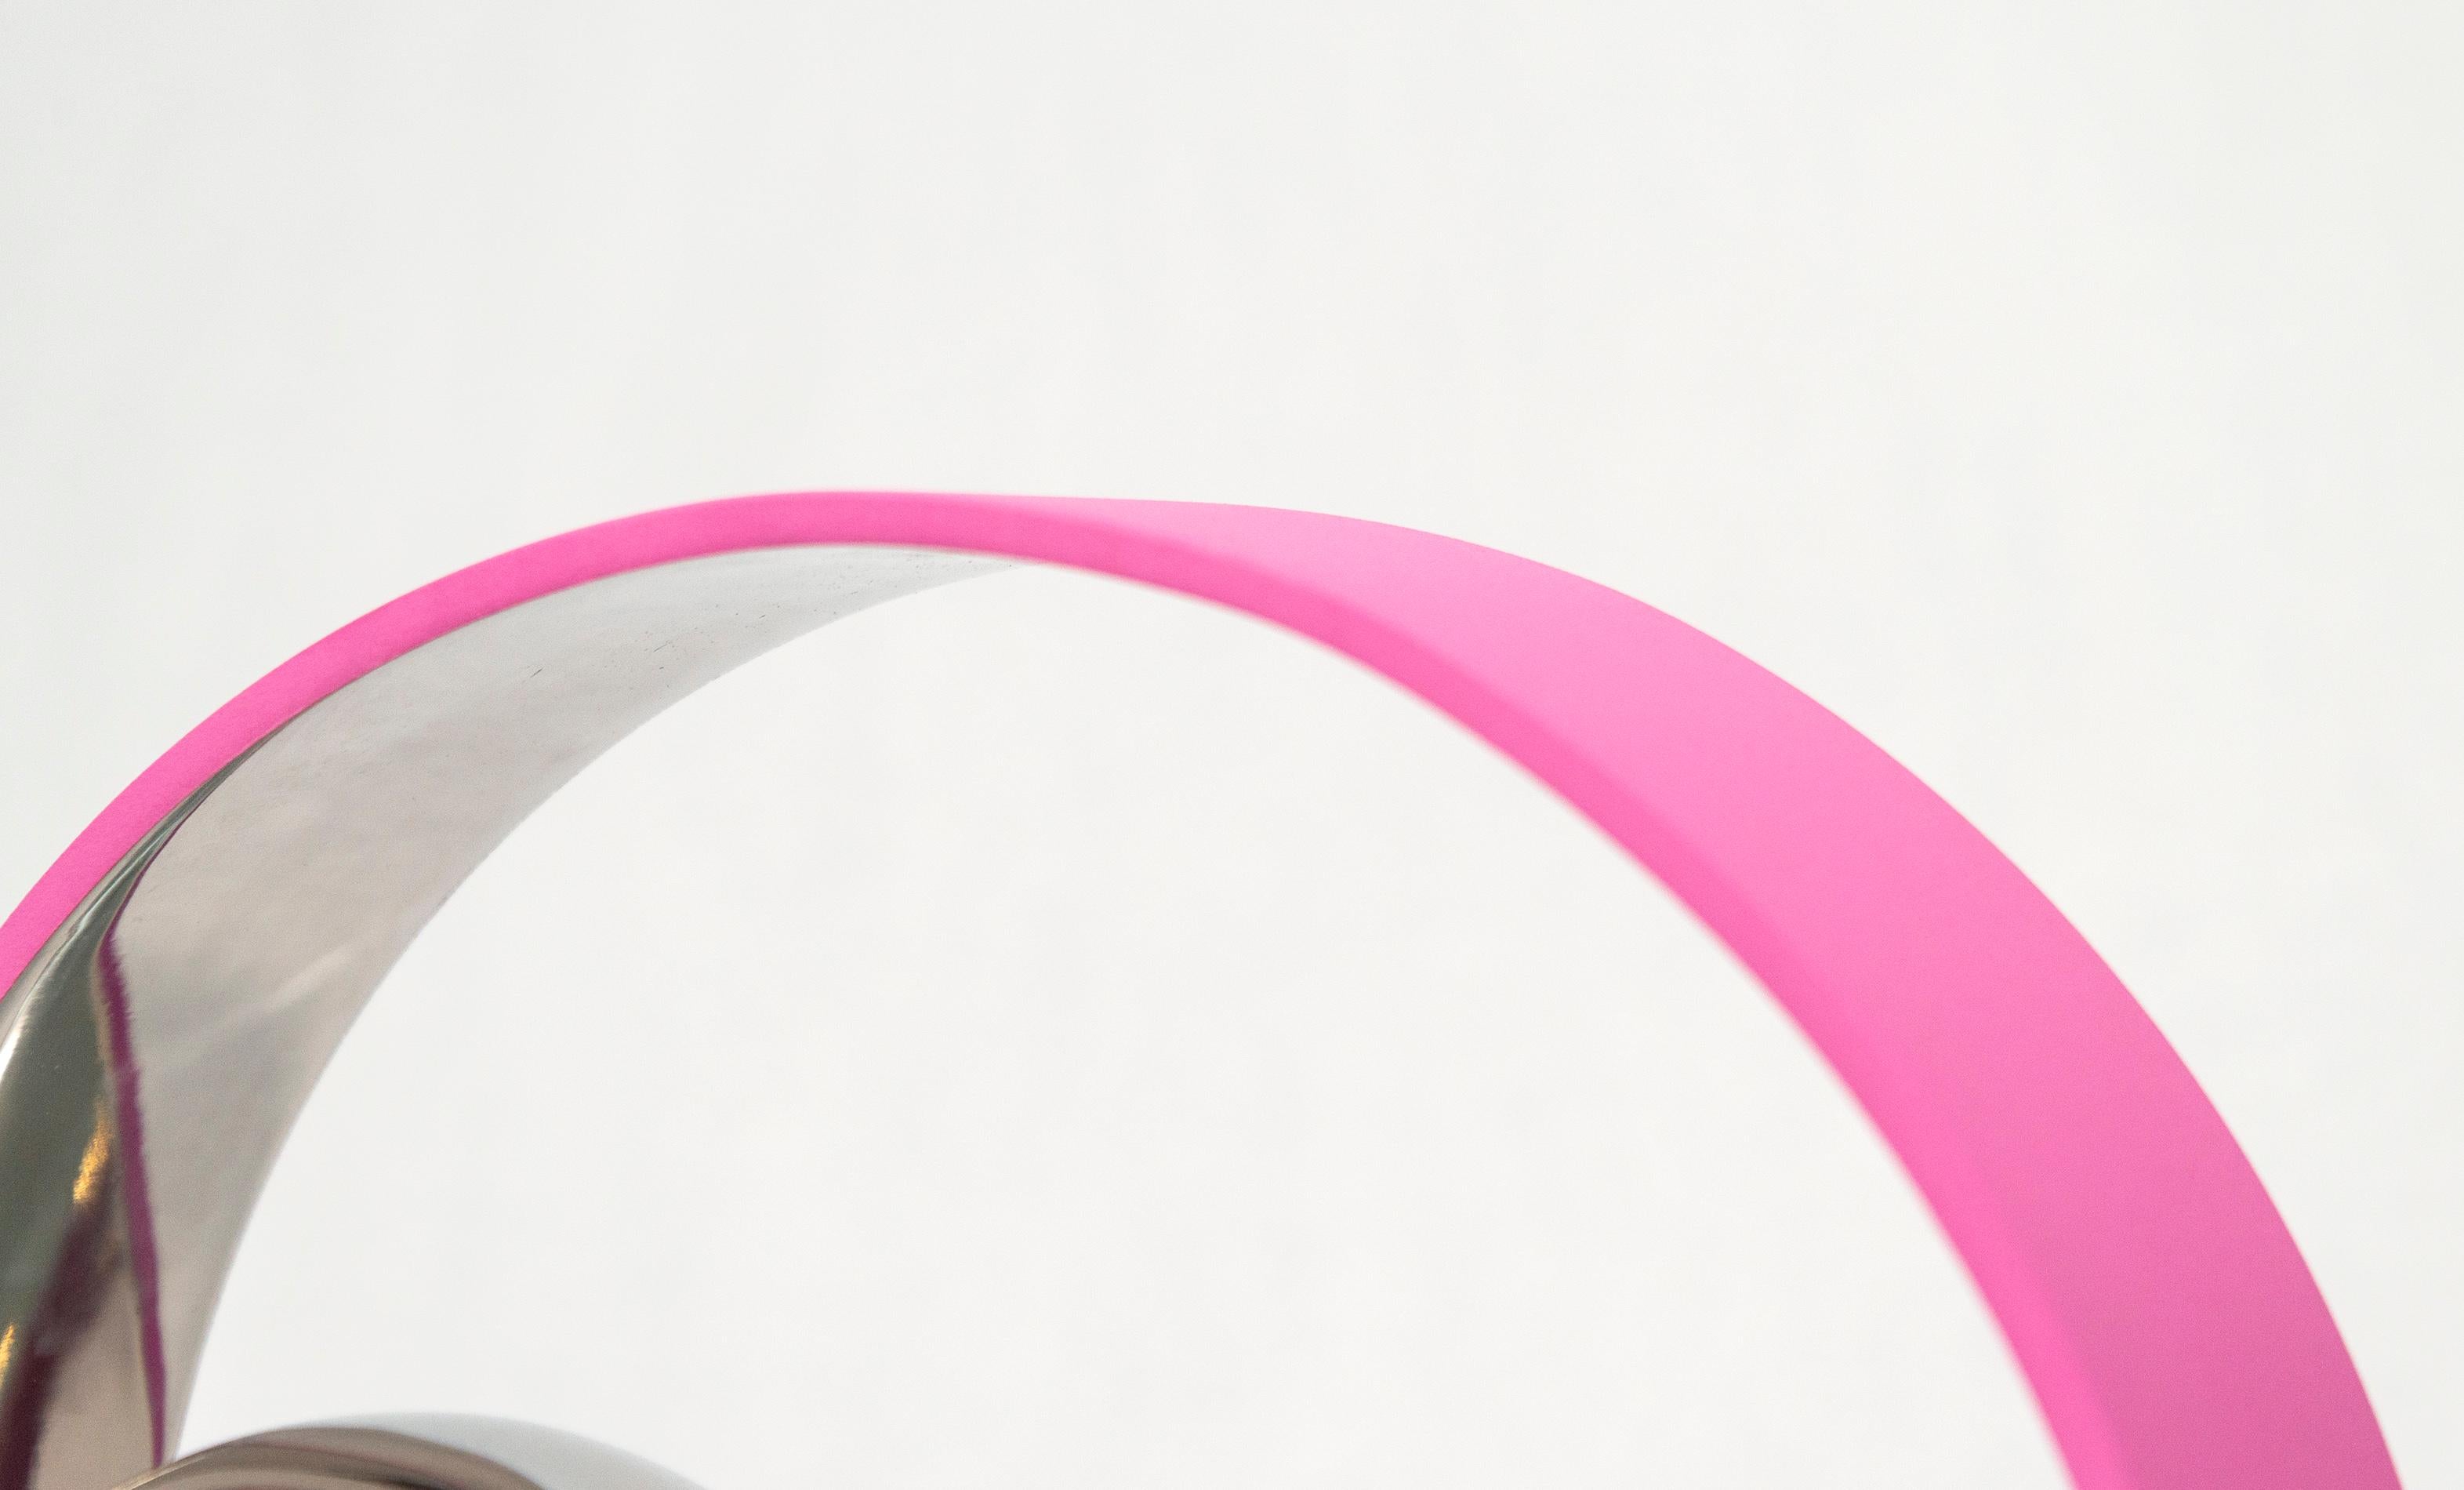 Two Ring Temps Zero Pink with Ball 2/10 - abstract, stainless steel, sculpture For Sale 2